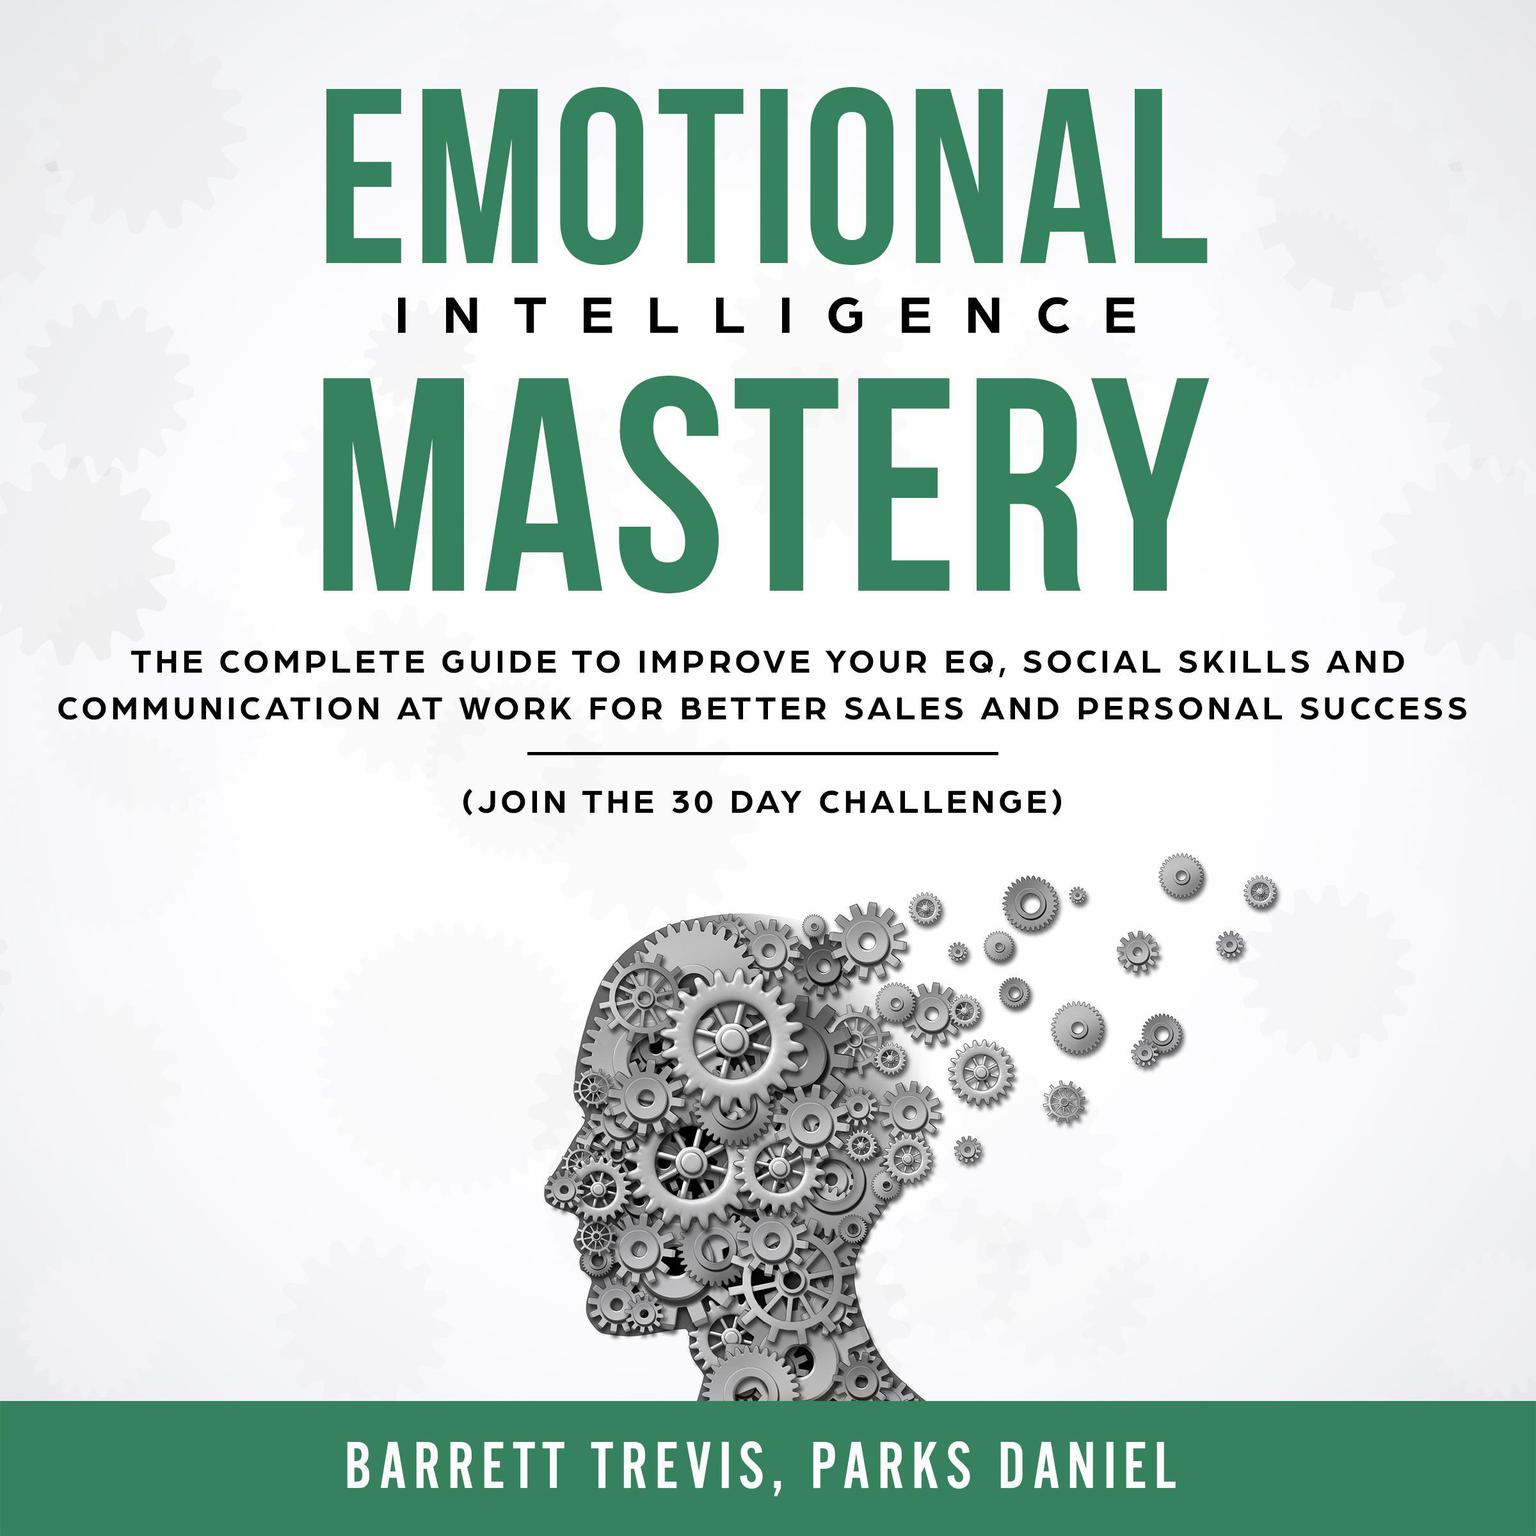 Emotional Intelligence Mastery: The complete Guide to improve your EQ, Social Skills and Communication at Work for better Sales and Personal Success (Join the 30 day Challenge) Audiobook, by Barrett Trevis